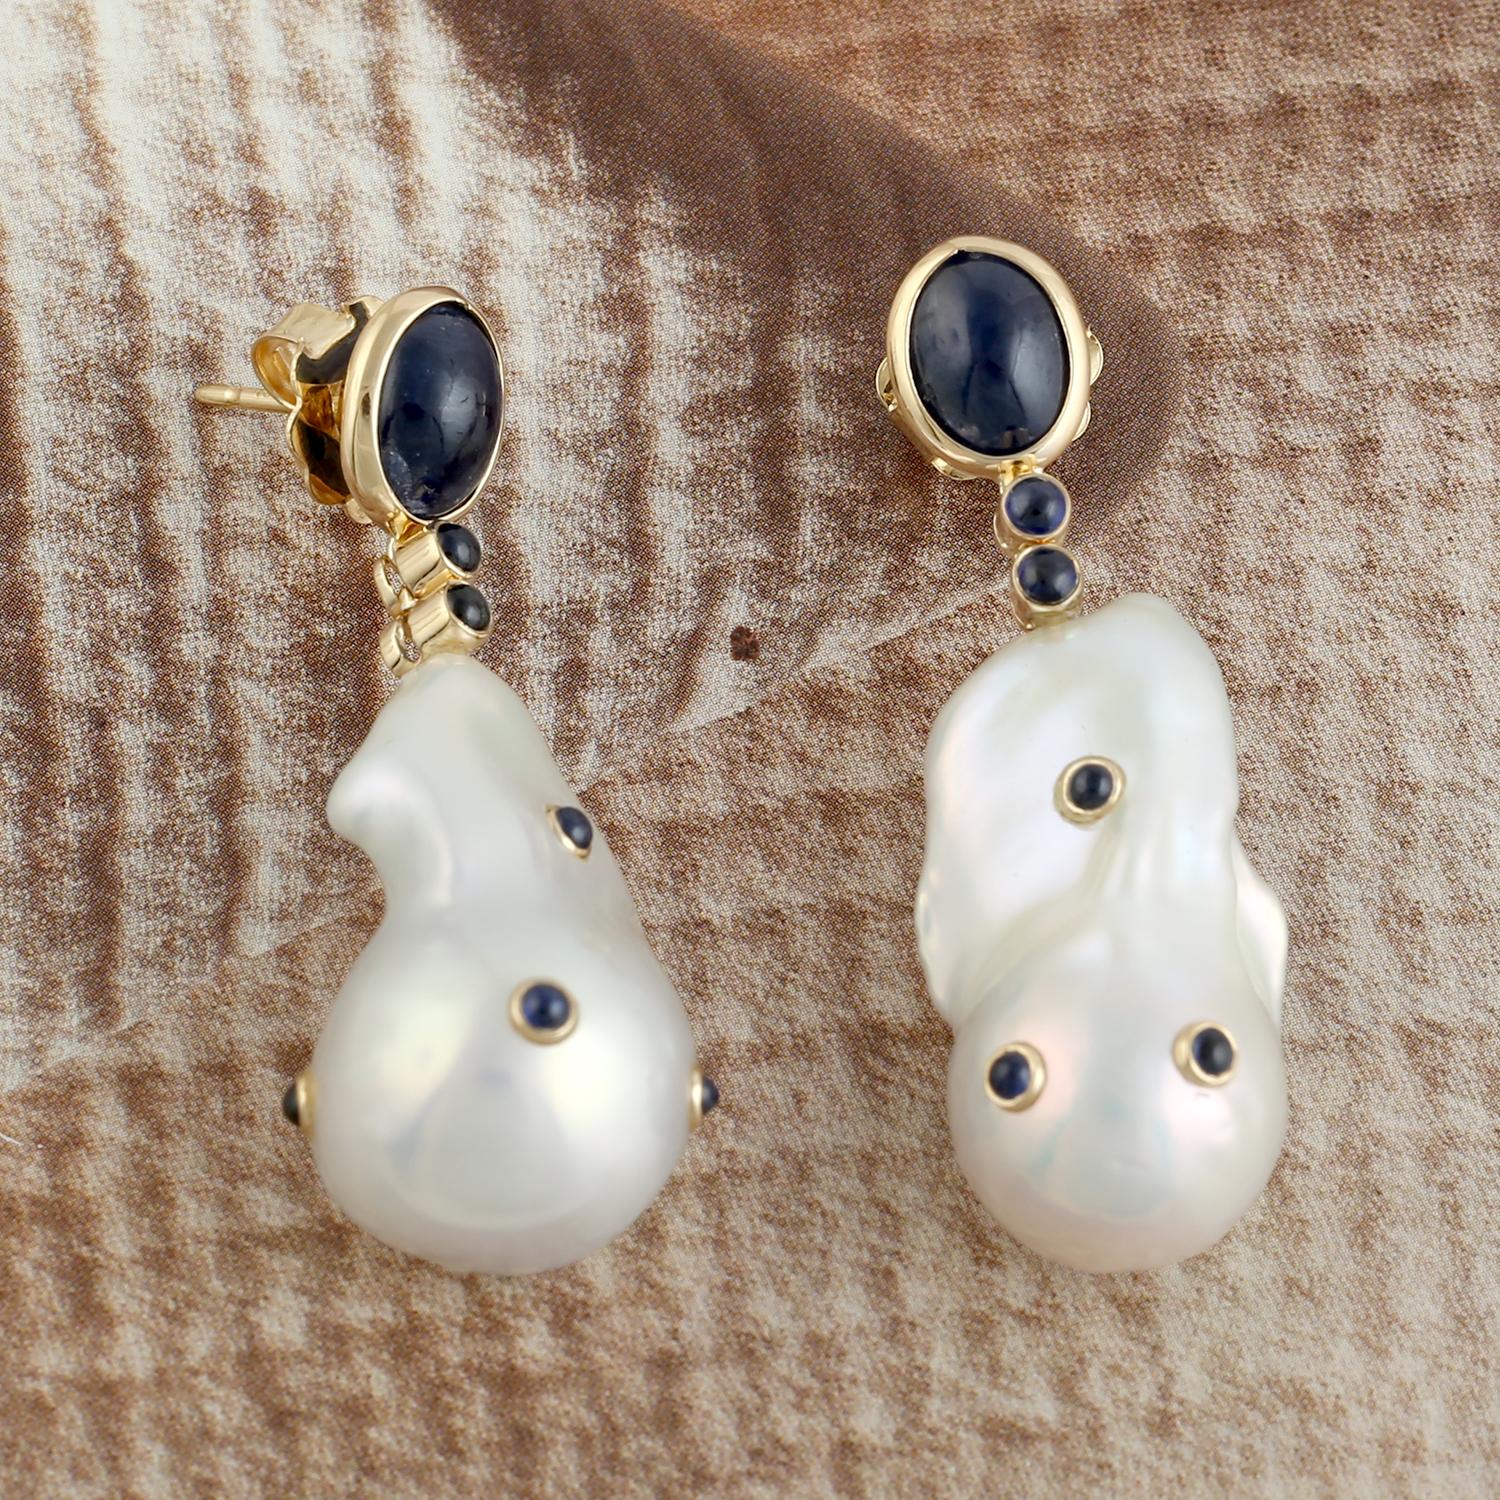 18KT:3.436g,
Pearl:58.12ct,
Sapphire:6.16ct,
Size: 43X13 MM